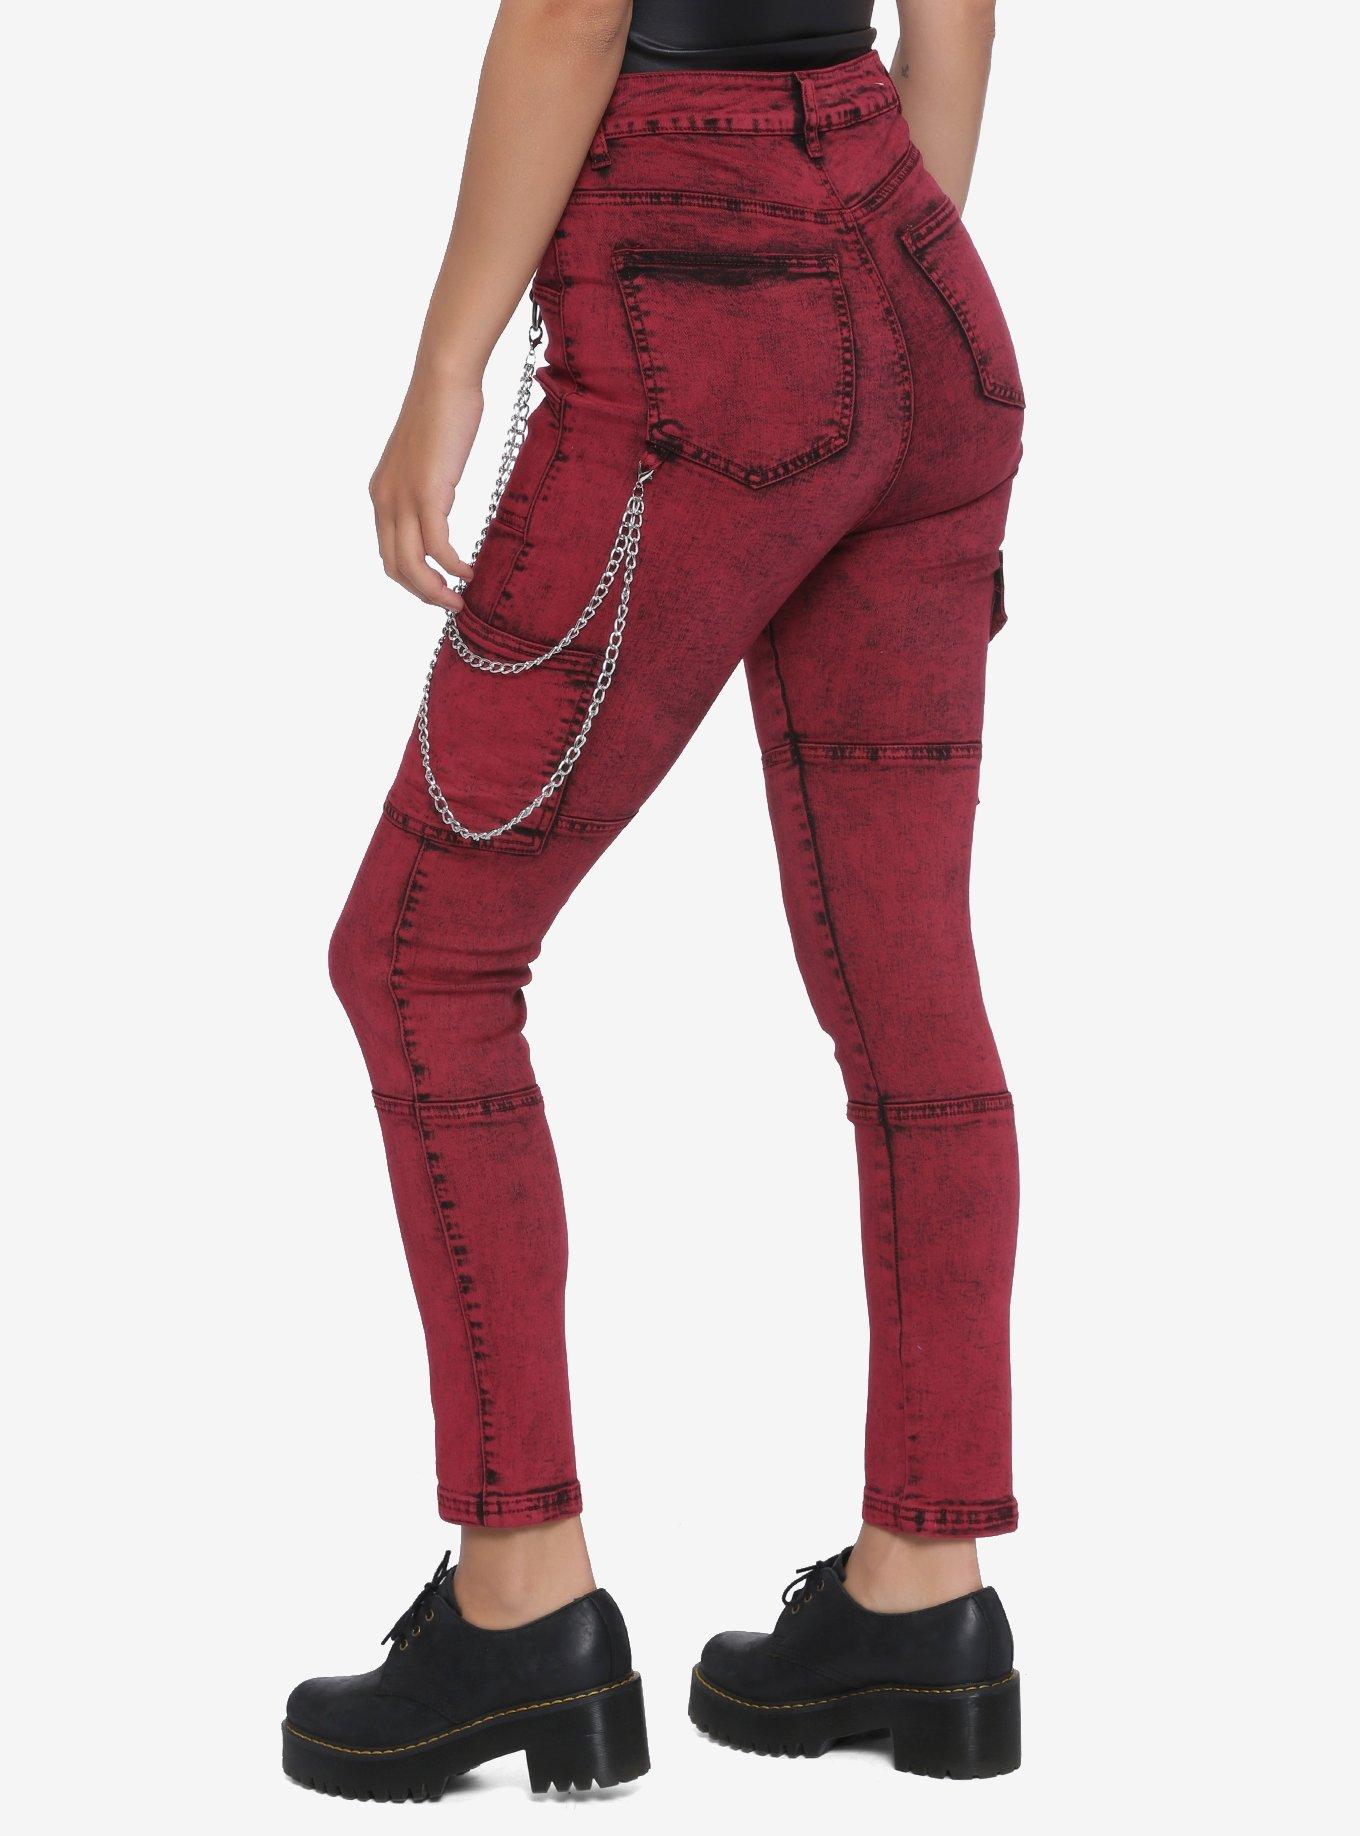 Pockets & Chains Red Washed Skinny Jeans, RED, alternate